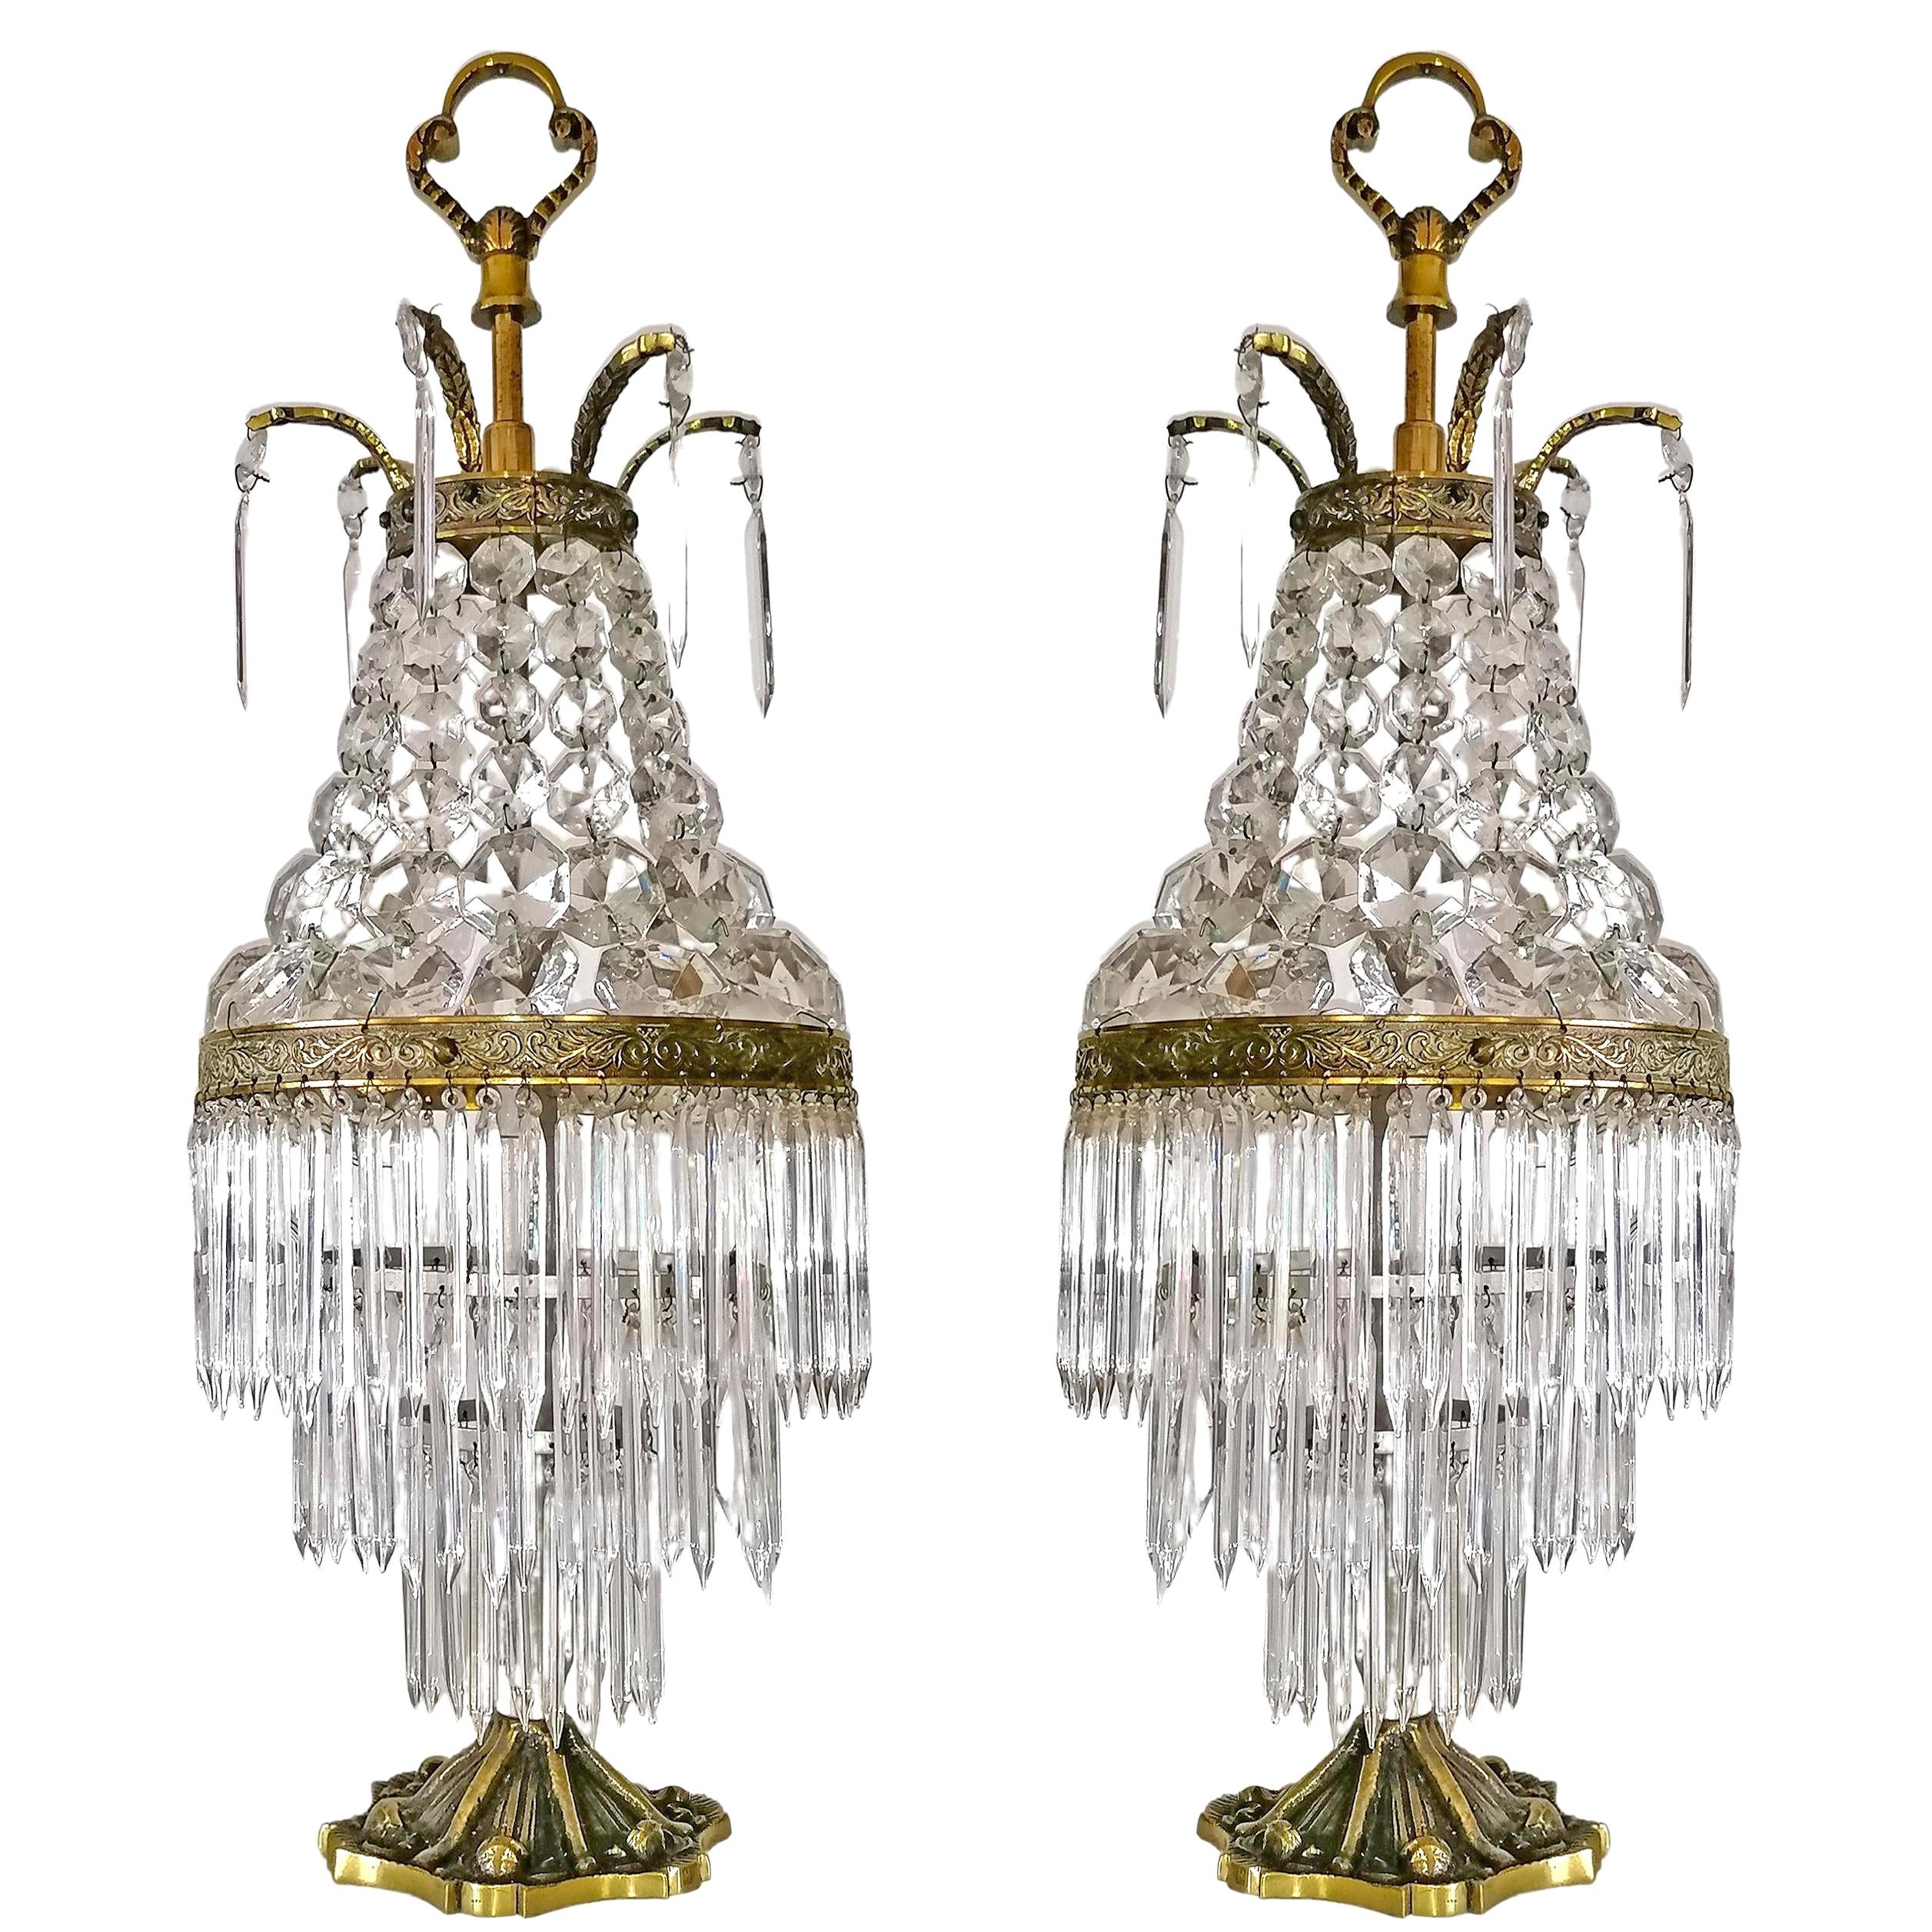 Pair of French Regency Empire in gilt bronze and crystal table lamps. 3 tiers wedding cake.
Housing 2-light bulbs each E14. Nickel detailing with all crystal intact.
Dimentions:
Height 20.5 in /52 cm
Diameter 8 in /20 cm
Weight 16 lb. / 7 kg
Good